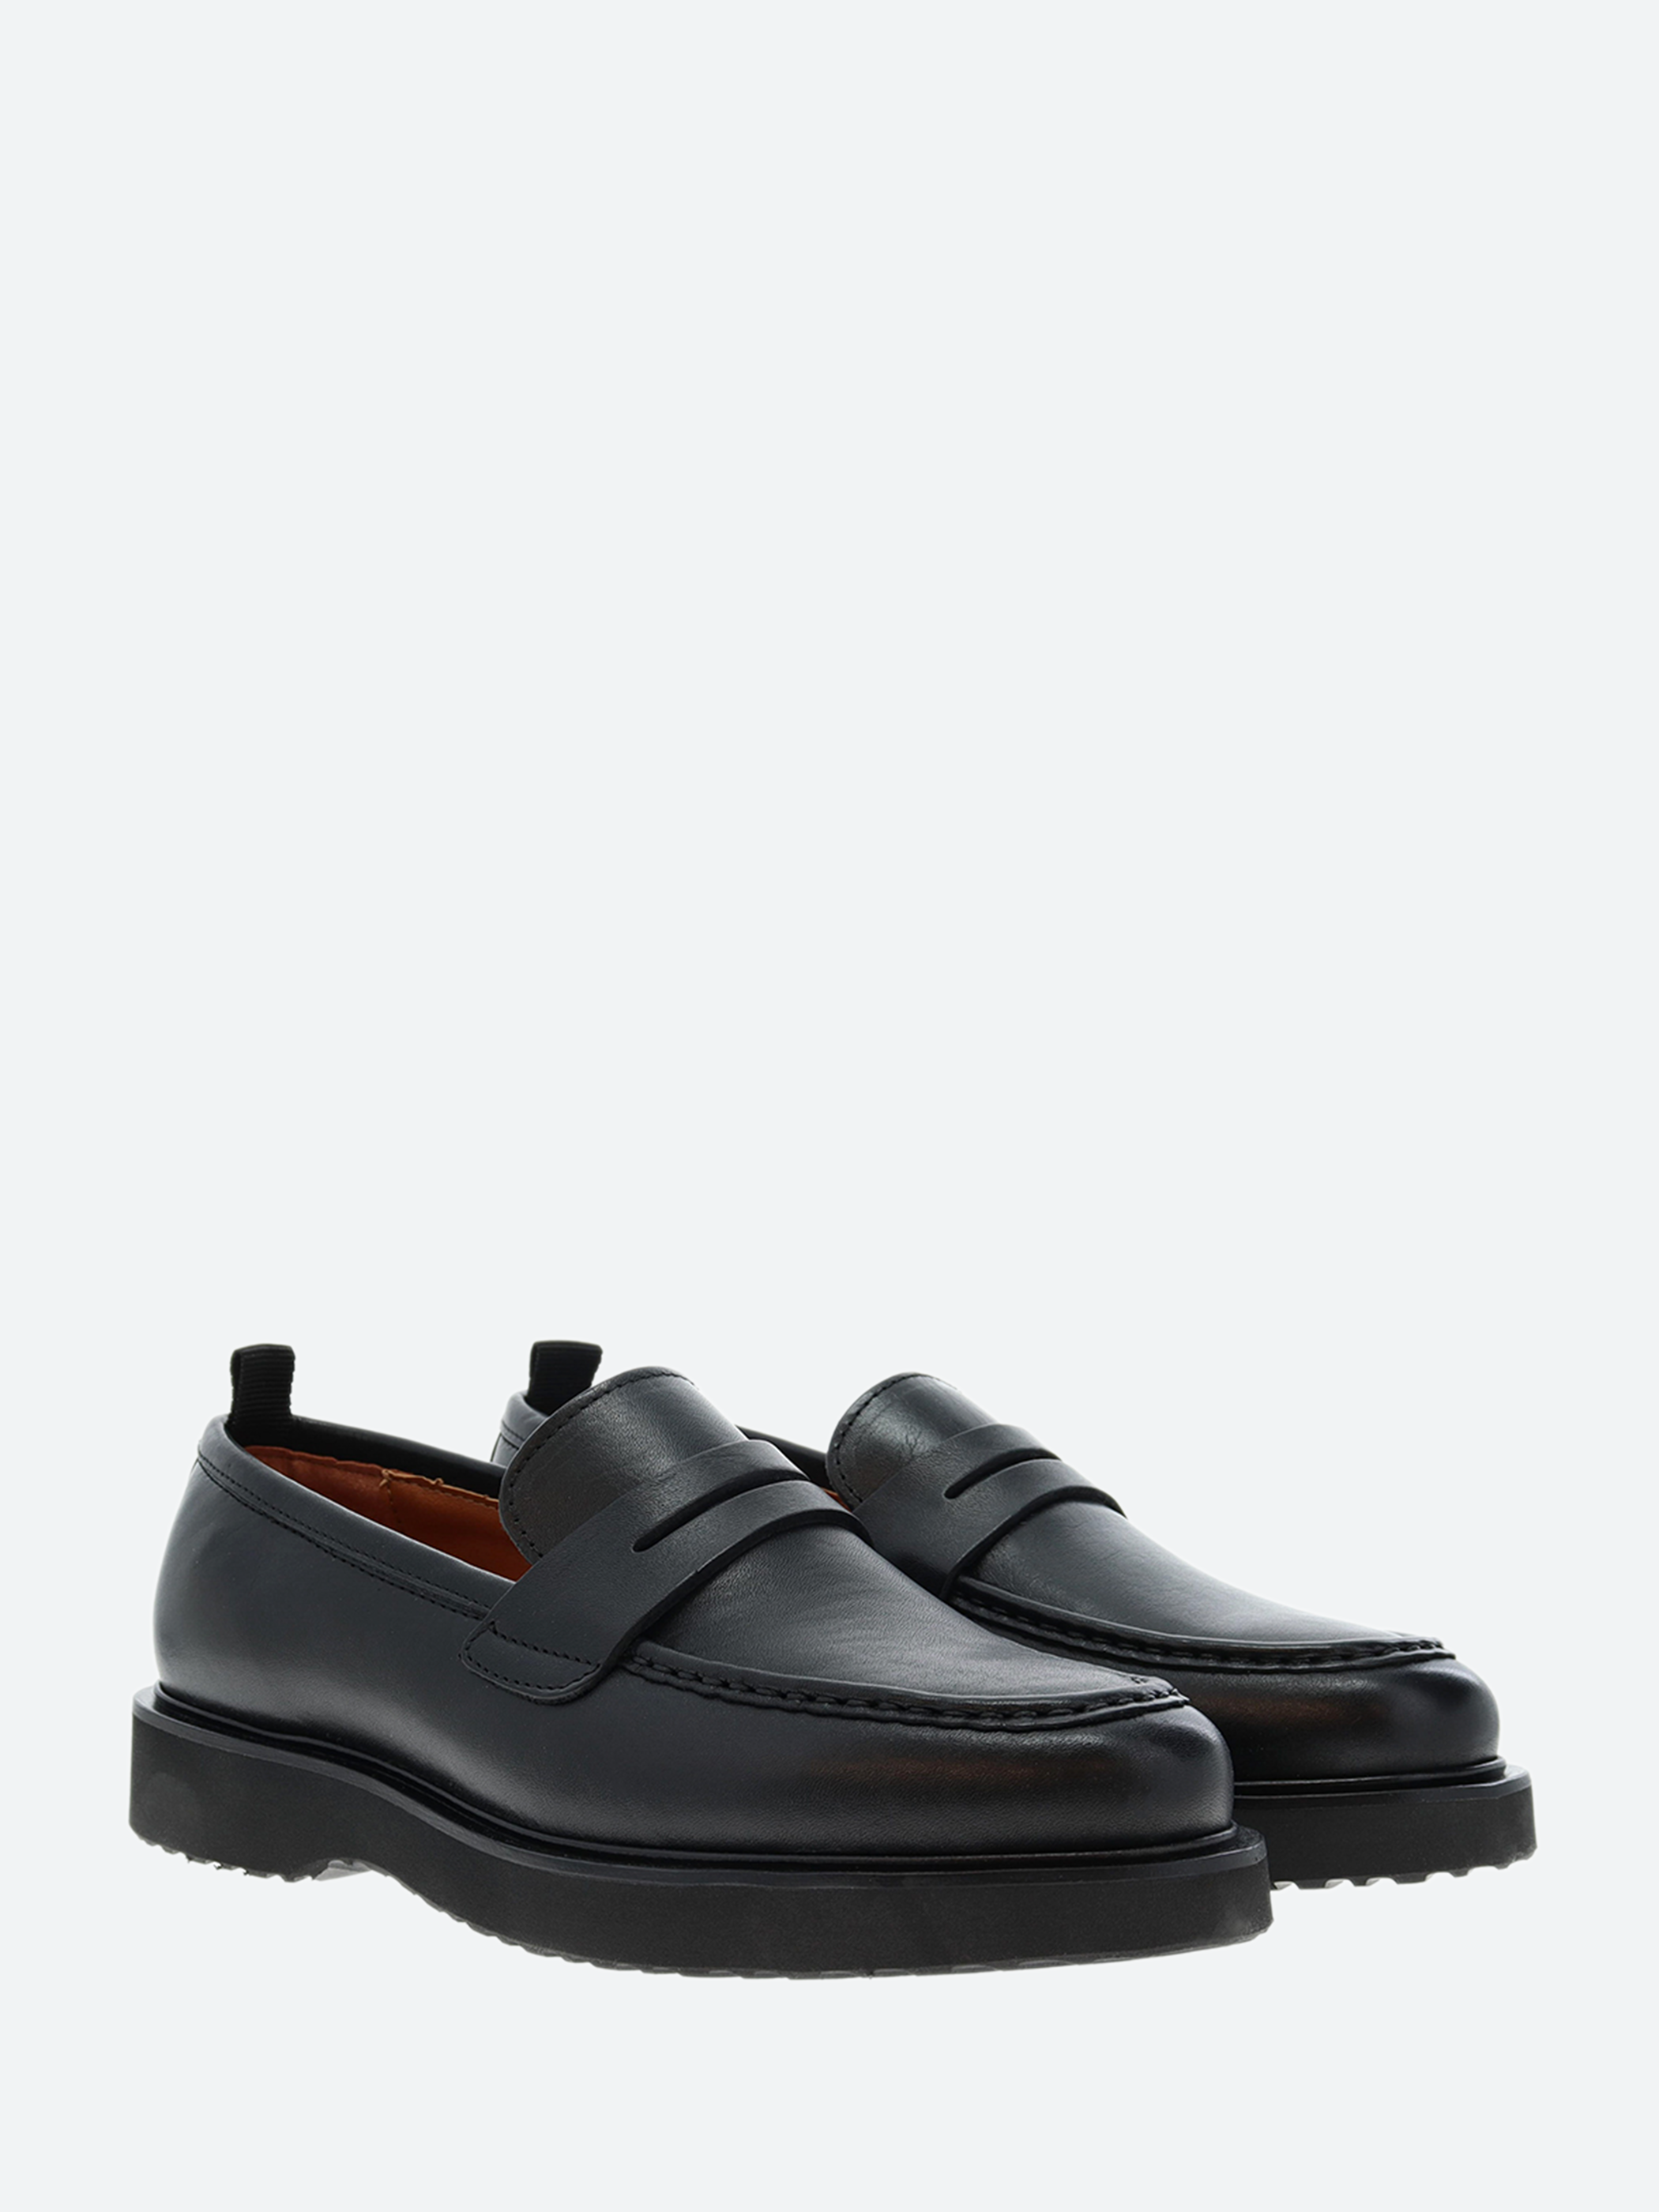 Cosmos 2 Loafer